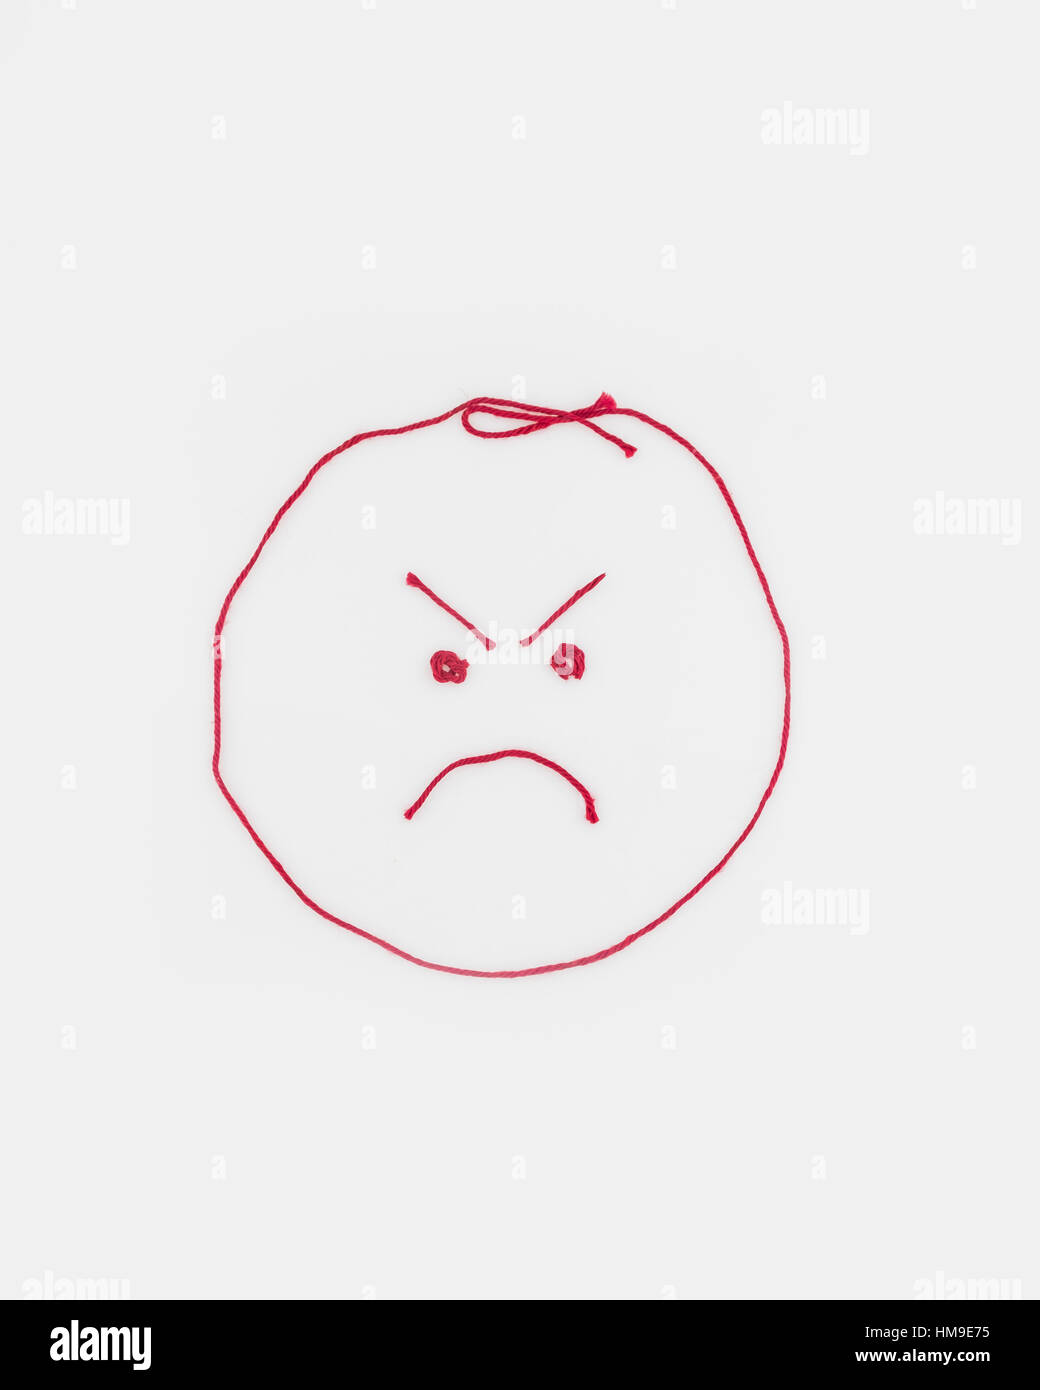 Concept, conceptual. An angry face shaped from red yarn. Cutout. Stock Photo